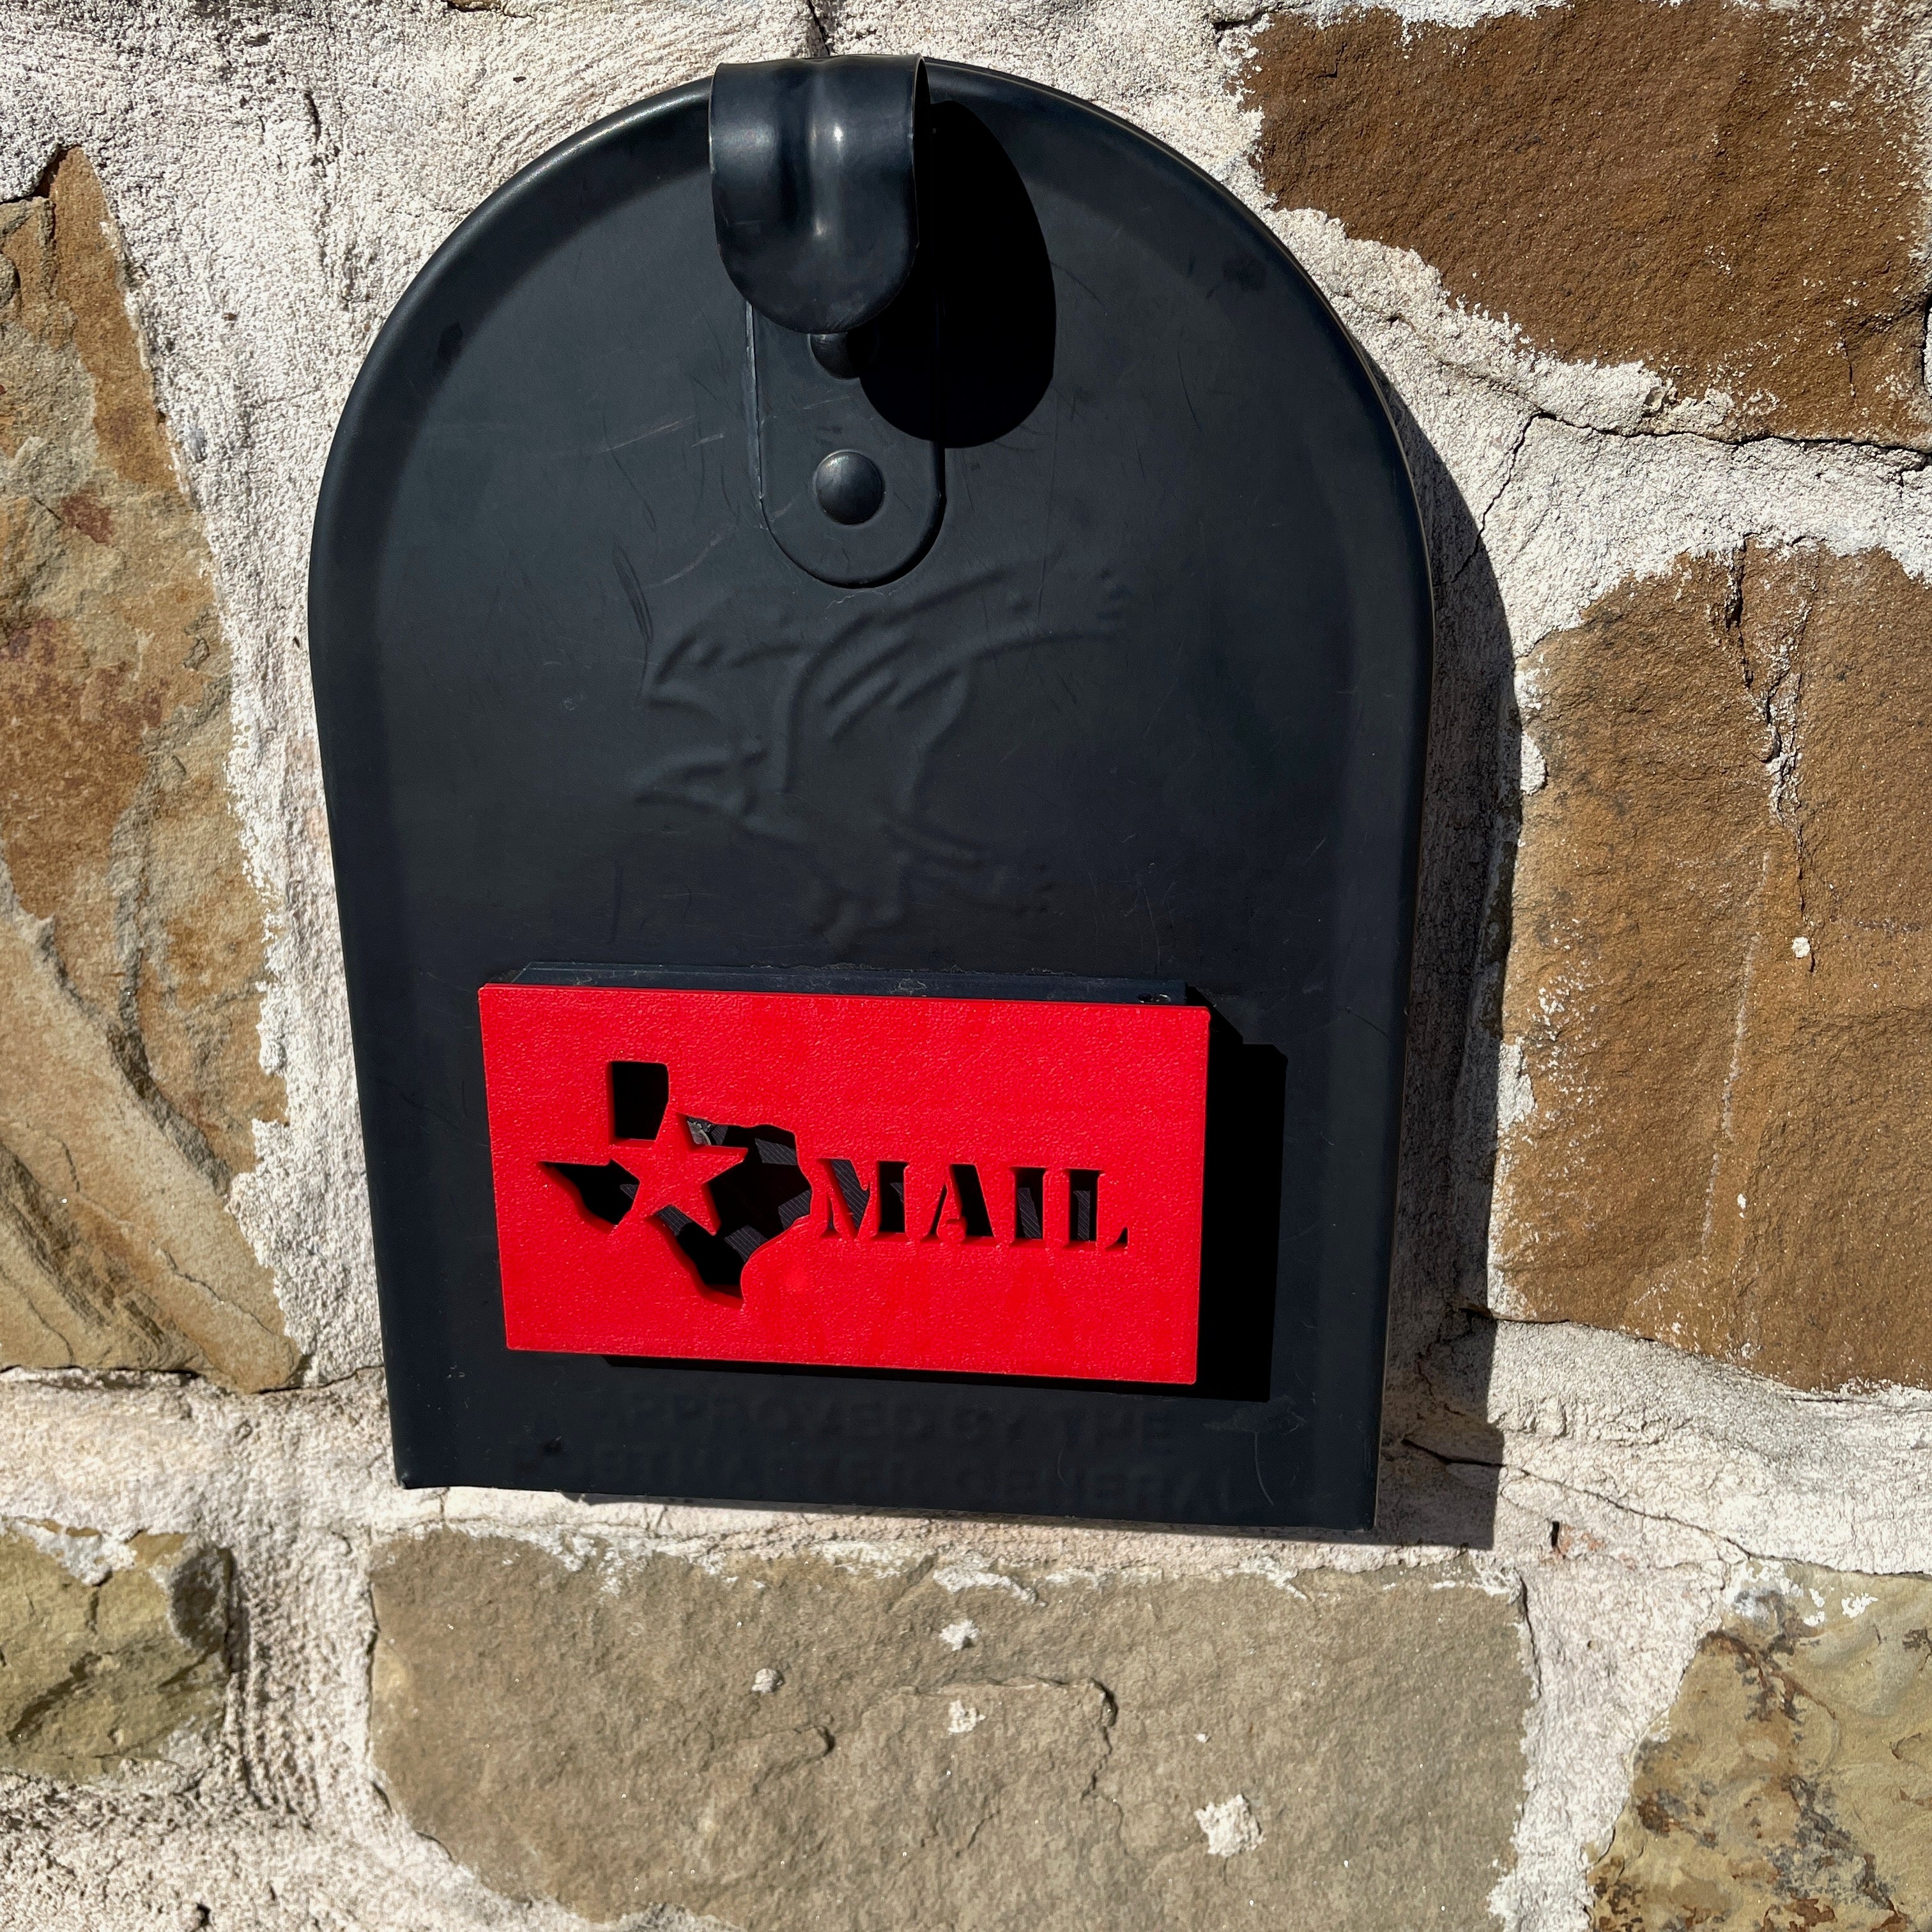 Mailbox Flag for Brick or Stone Mailboxes adds Texas Flair to your Mailbox Decor.